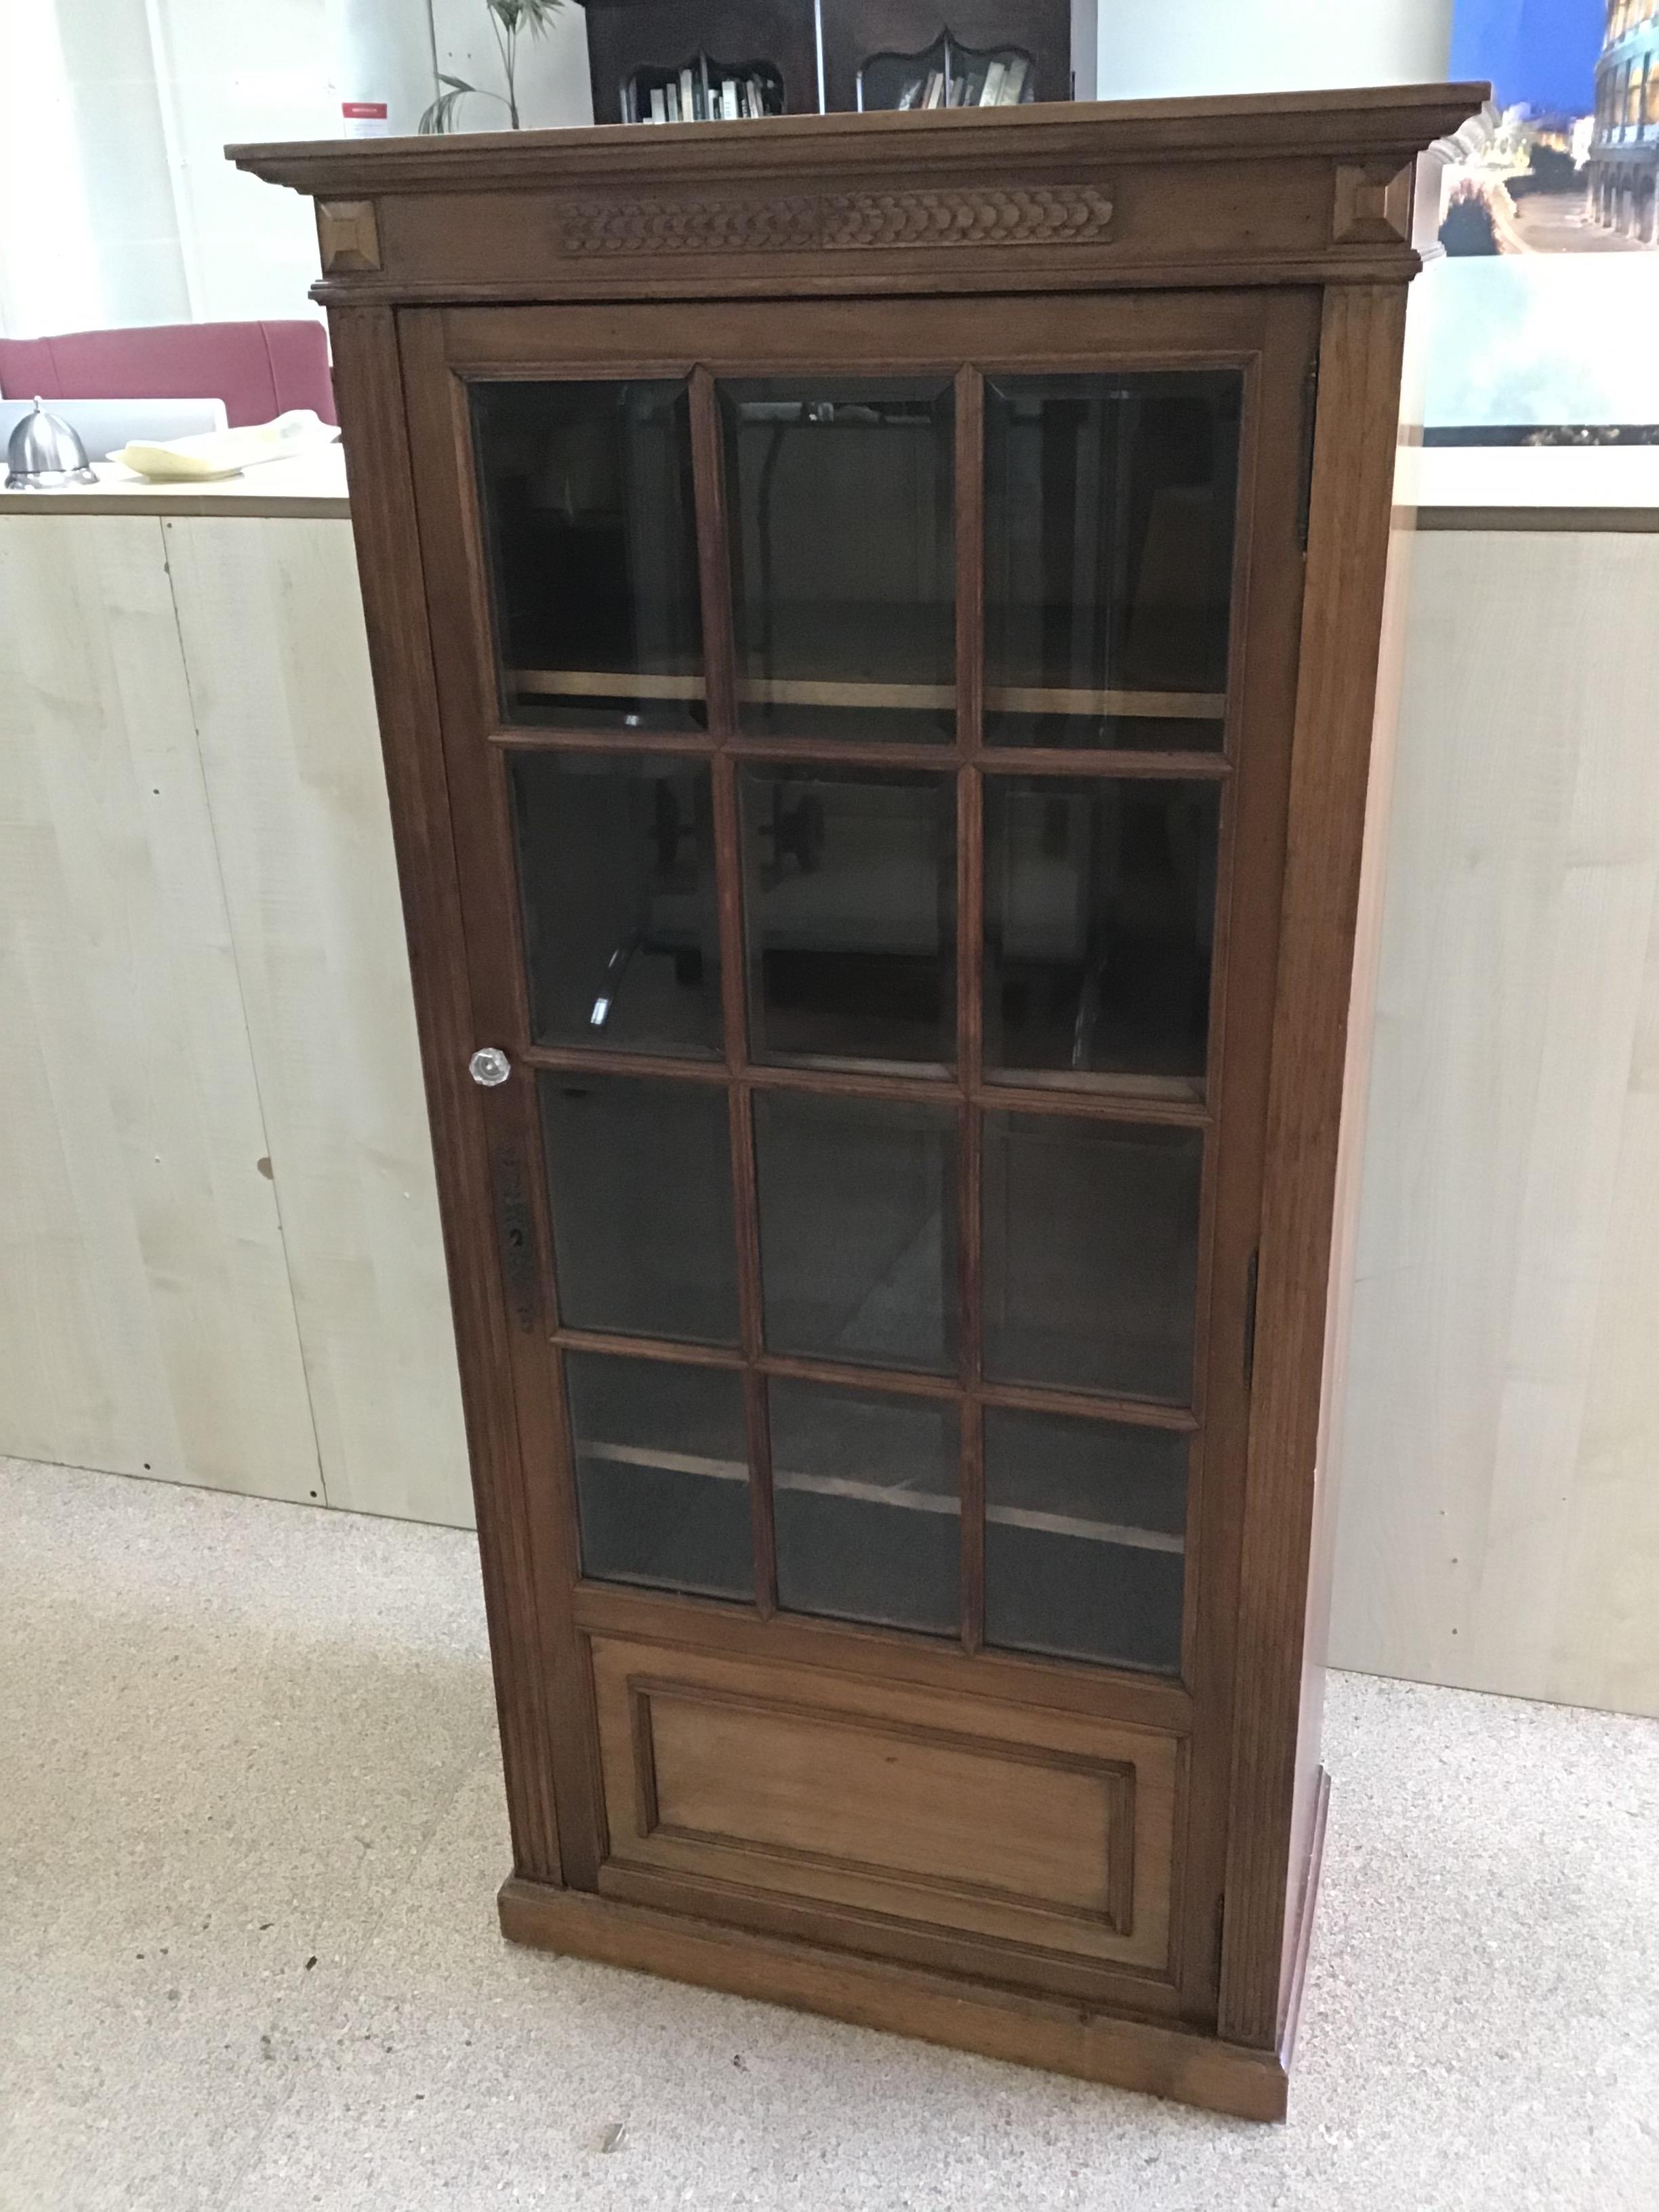 AN EDWARDIAN DISPLAY CABINET WITH BEVELLED GLASS AND LOCKABLE KEY - Image 3 of 9